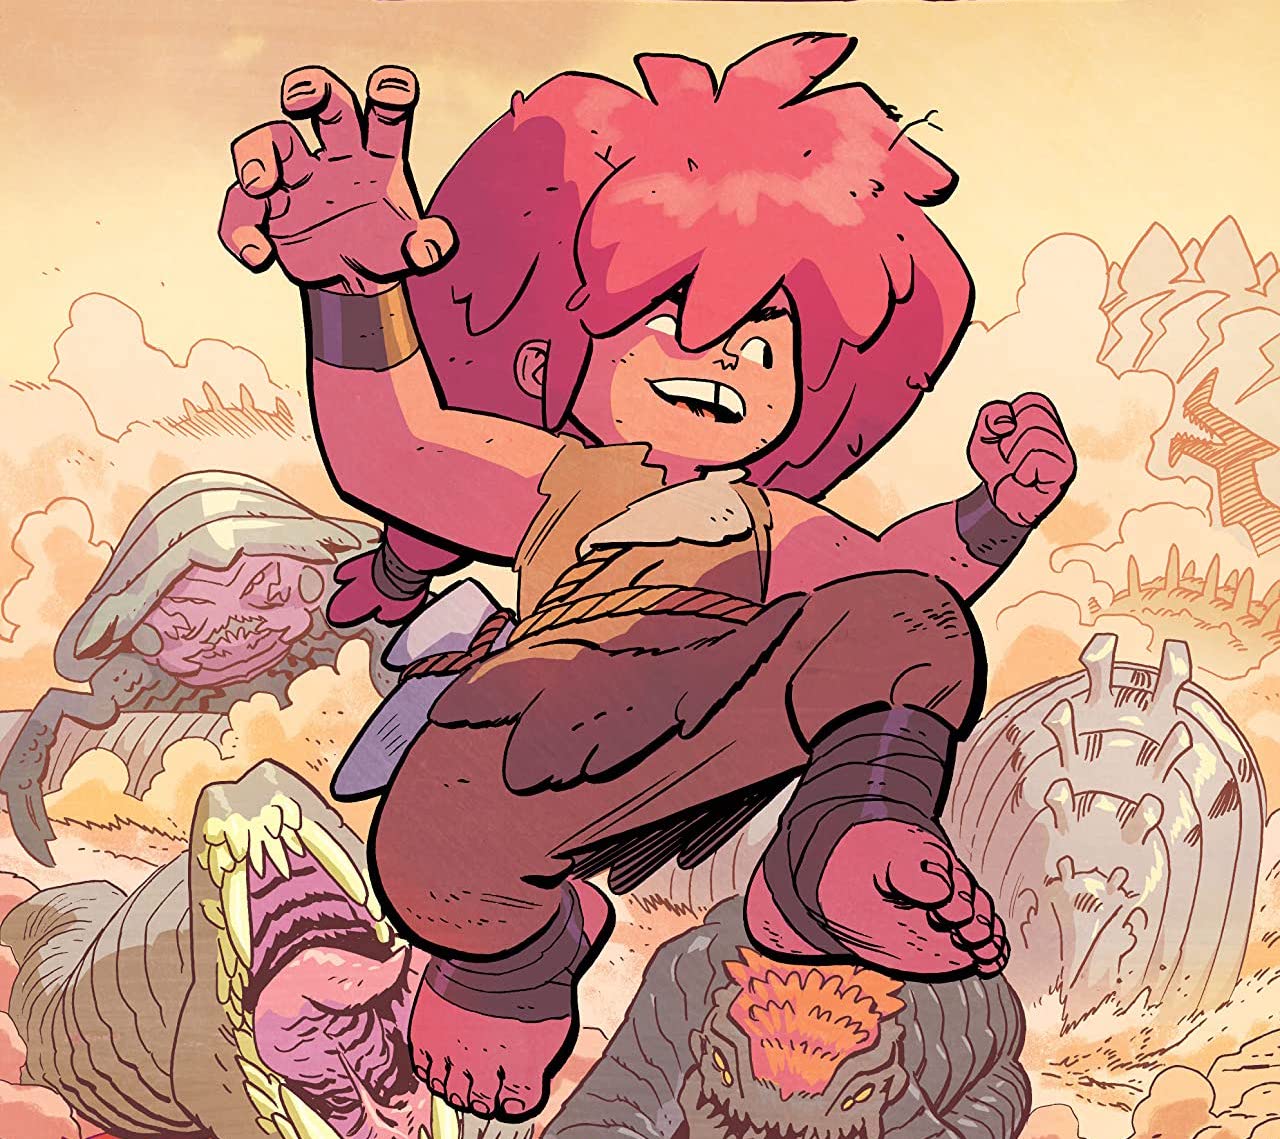 'Jonna and the Unpossible Monsters' #1 serves epic scale and mystery